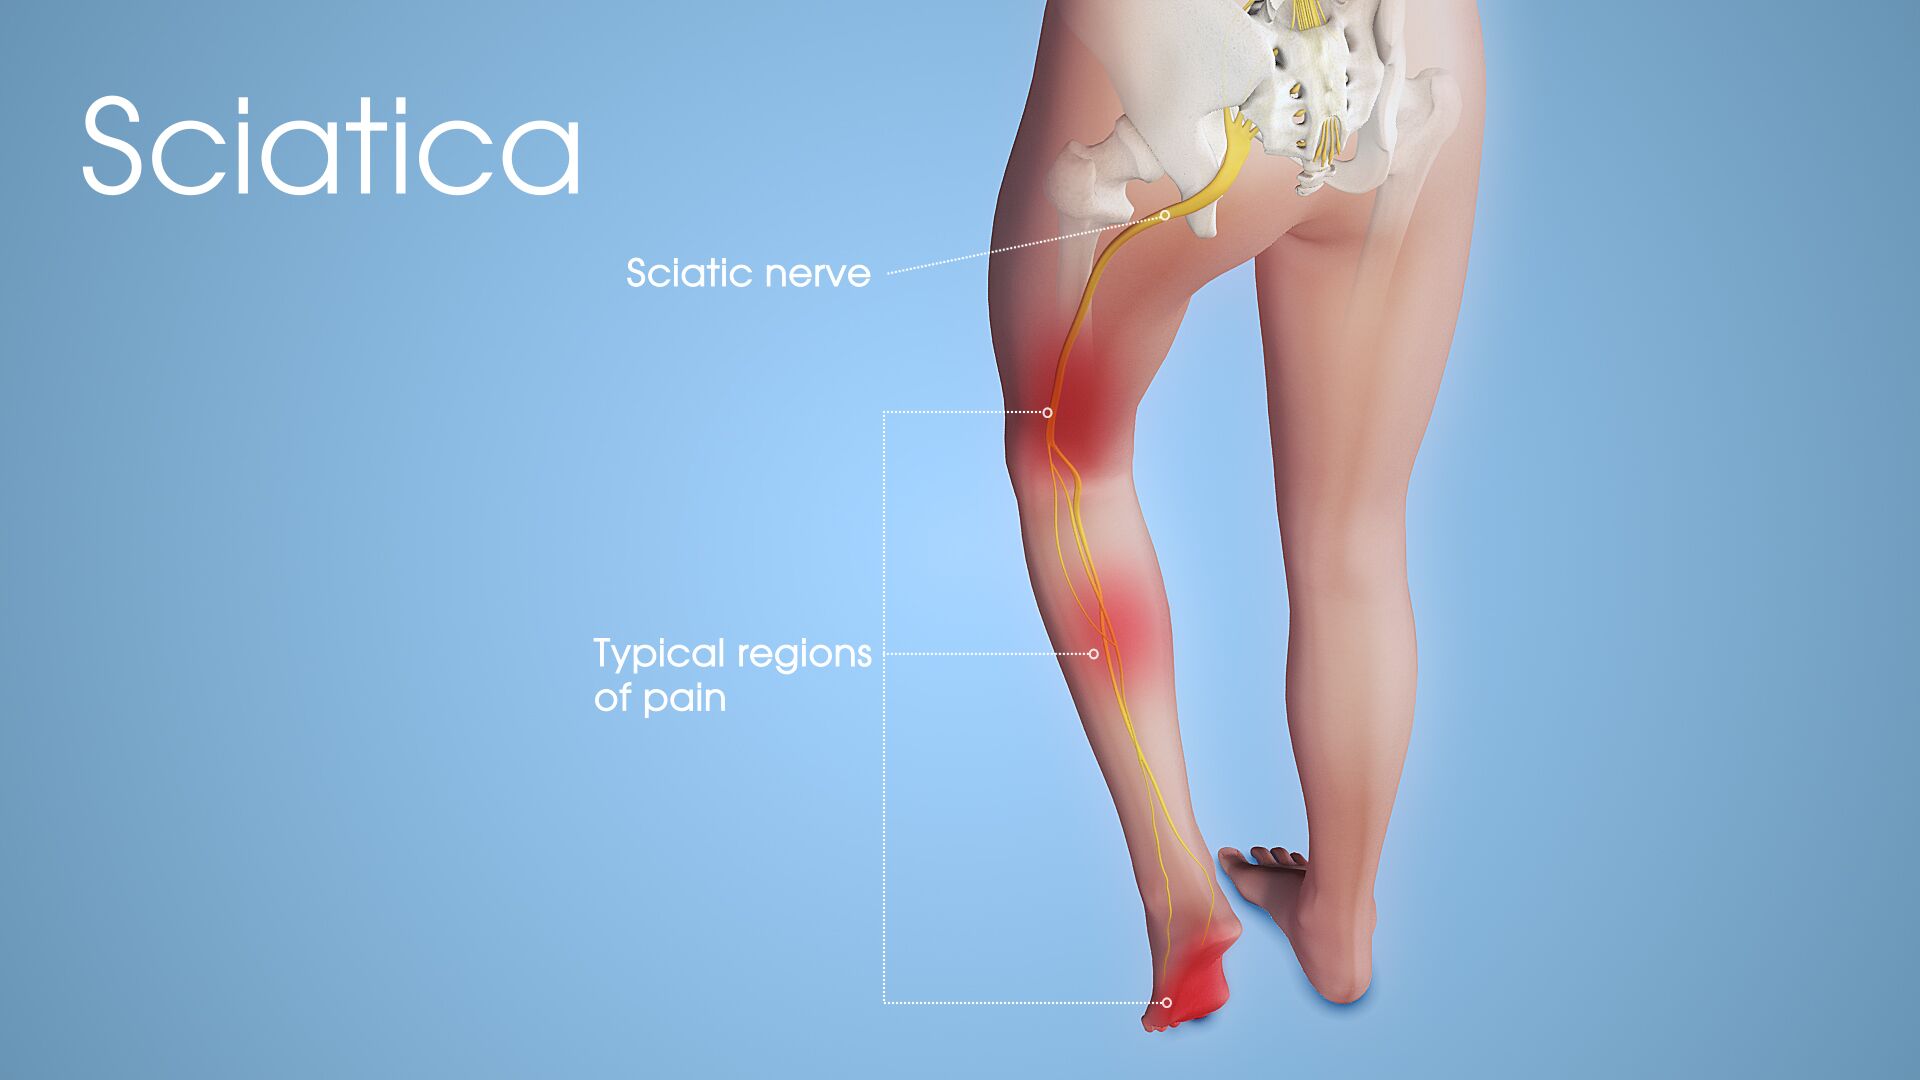 TREATMENT FOR SCIATIC NERVE PAIN | HOW SUPPLEMENTS WORK